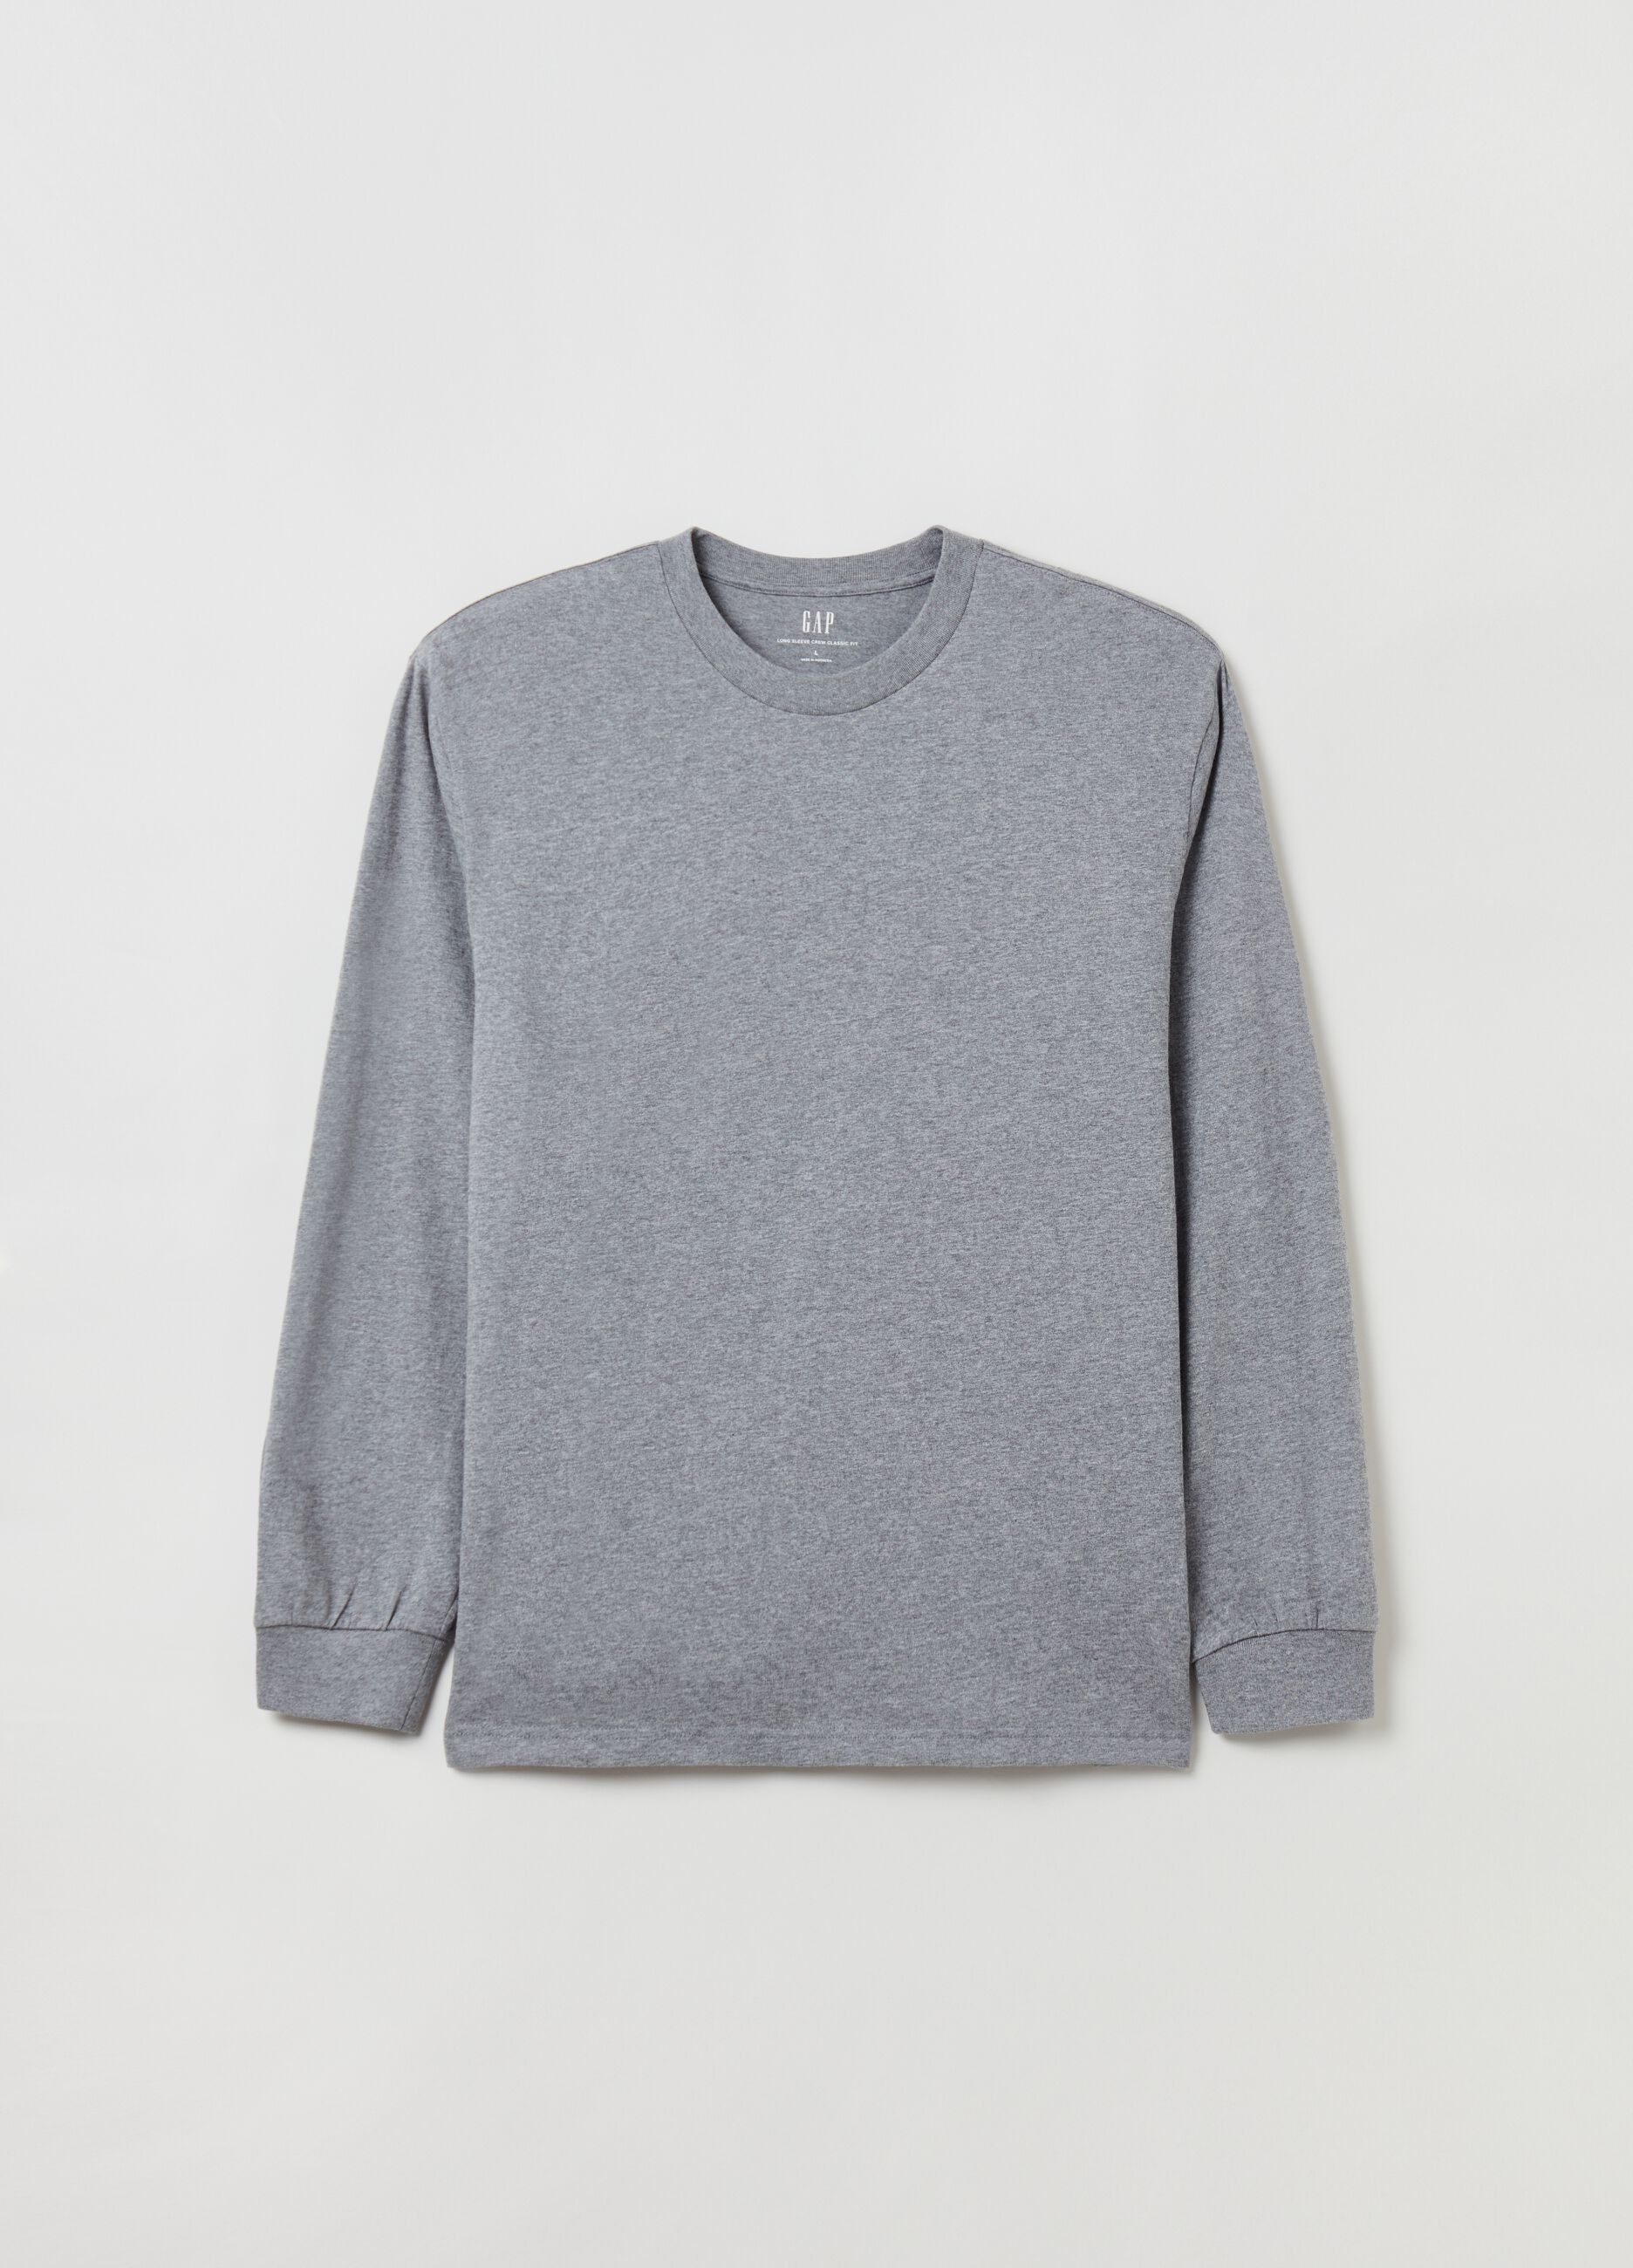 Long-sleeved T-shirt in organic cotton._1